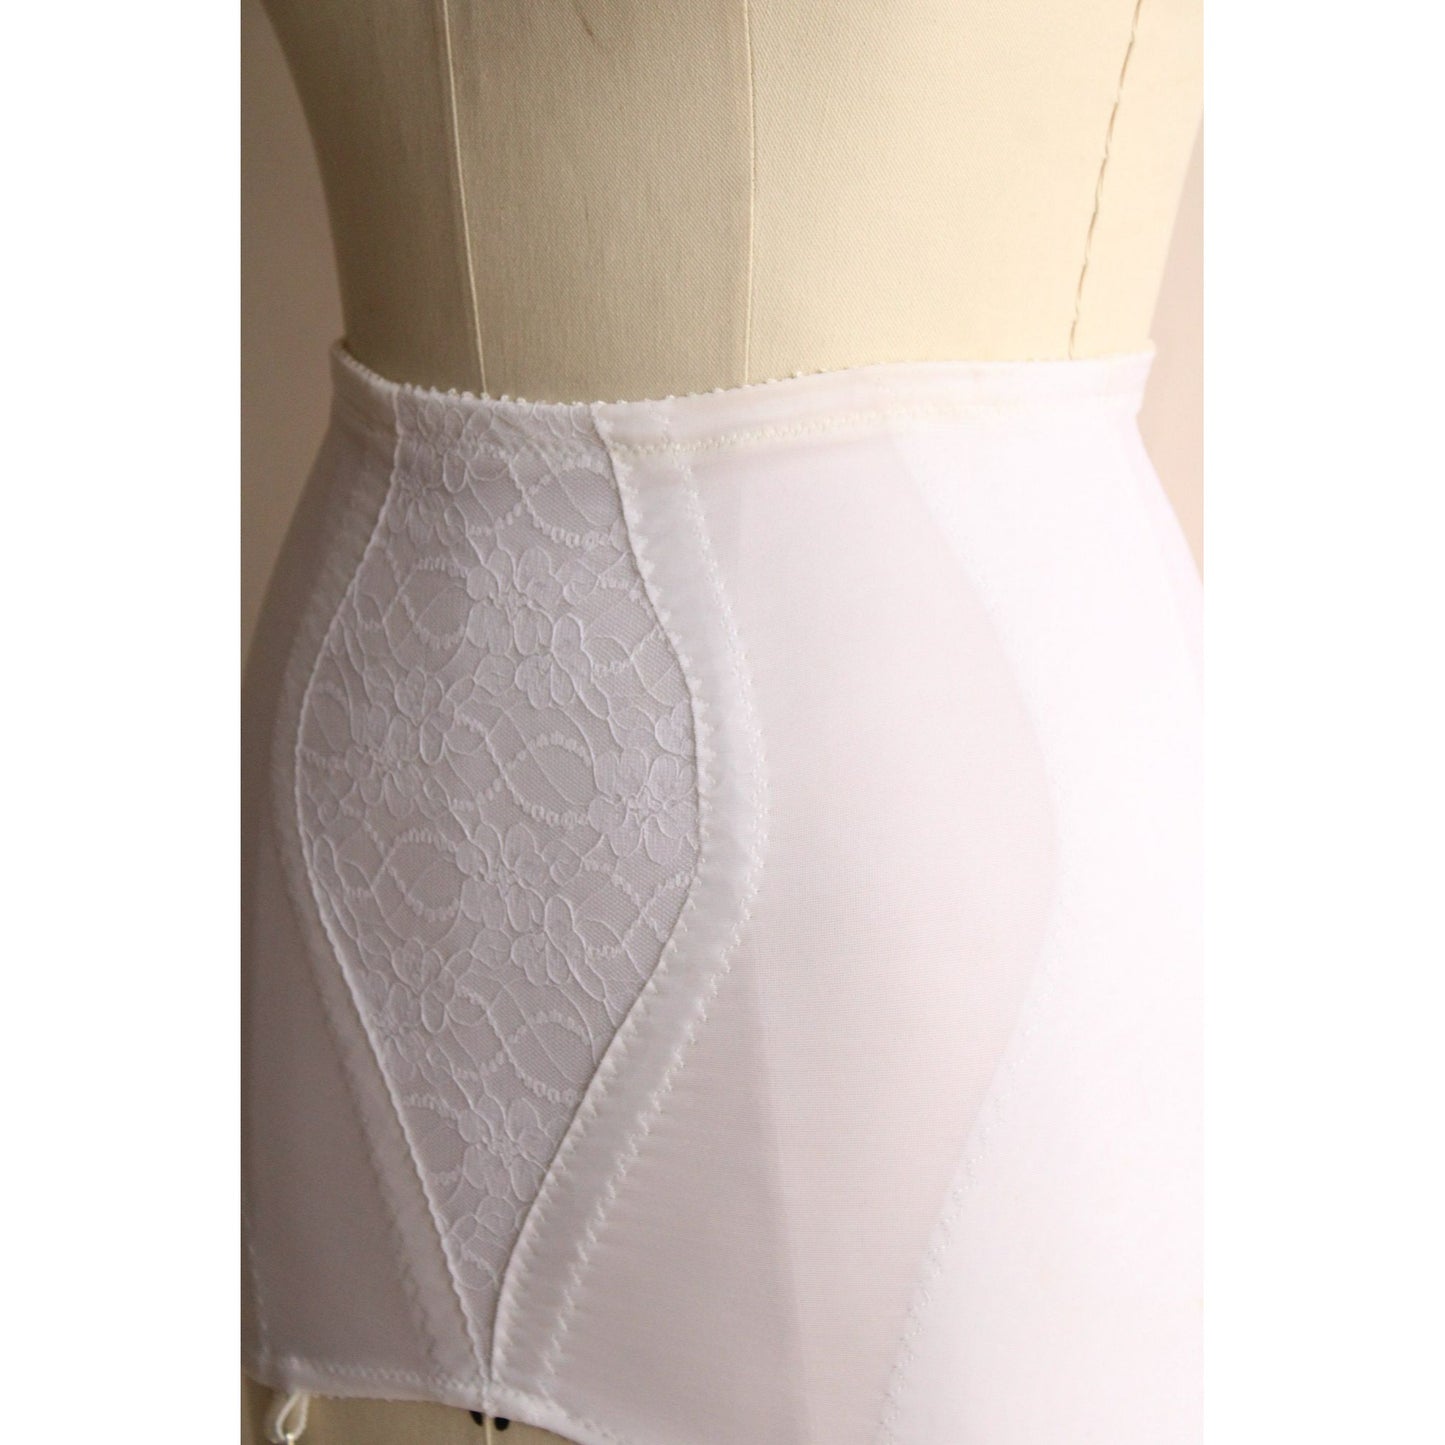 Vintage 1990s Vicky Form Control Top Girdle